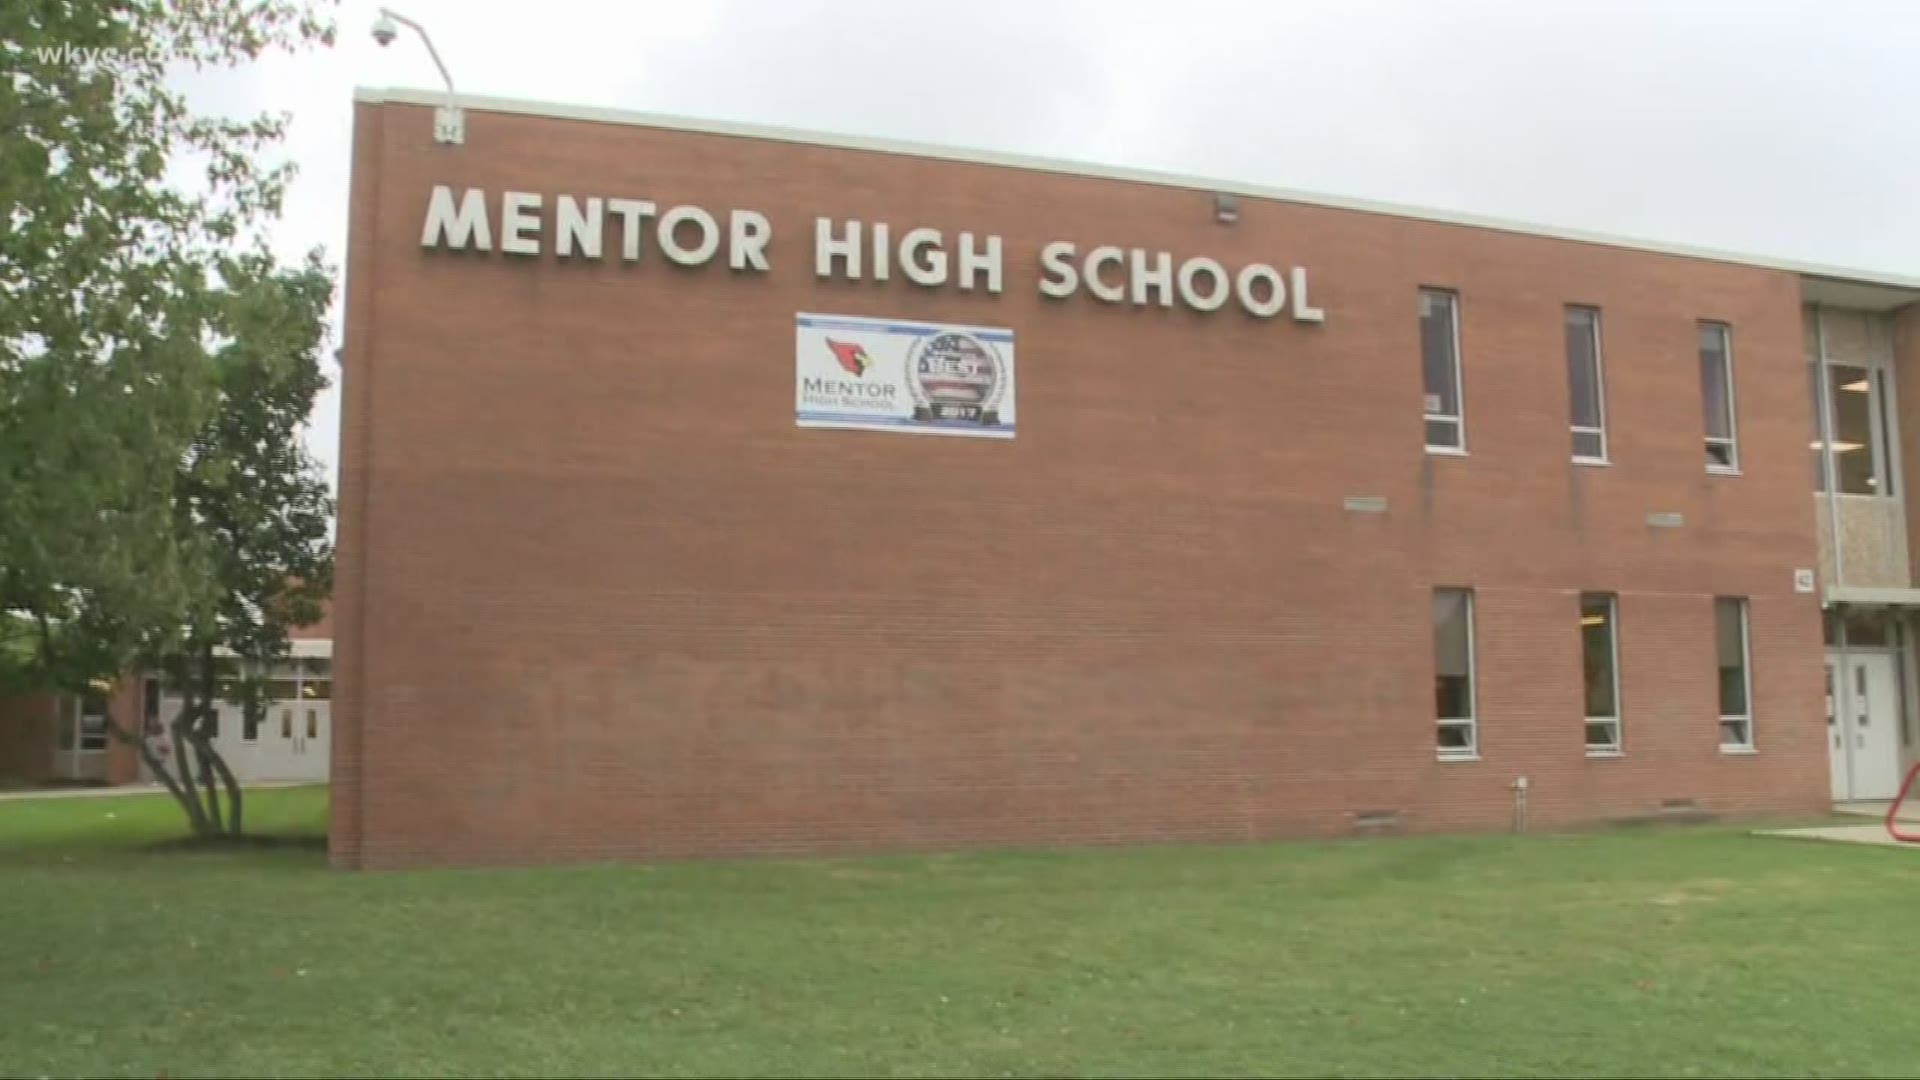 Oct. 7, 2019: Superintendent Bill Porter confirms Mentor High School will reopen on Monday following Friday's closure due to 'a threat of potential violence.'